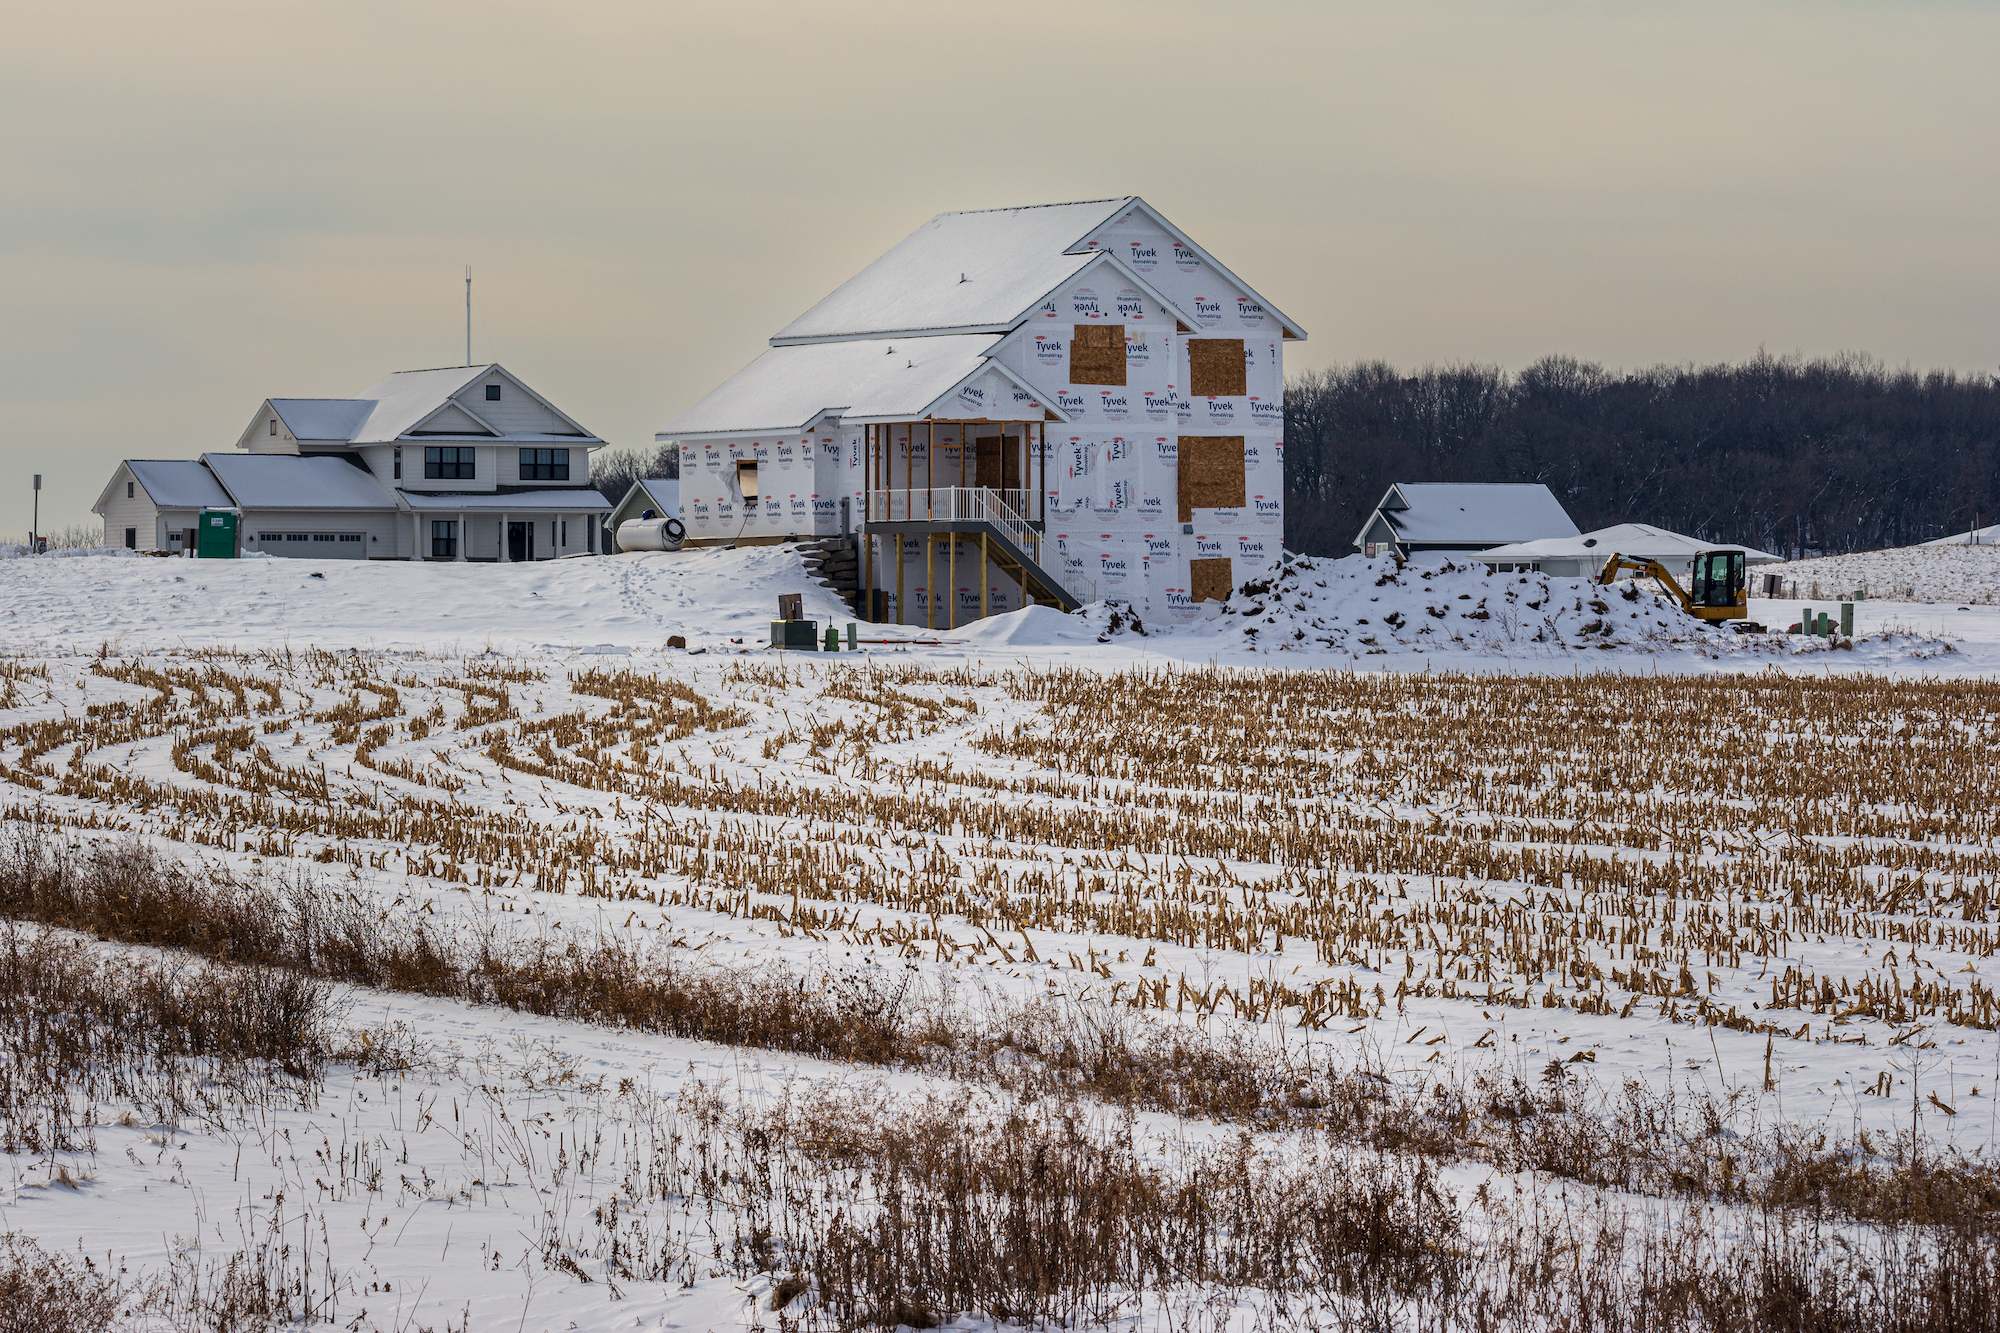 A house being built near Waunakee, Wis. on Jan. 4, 2022.